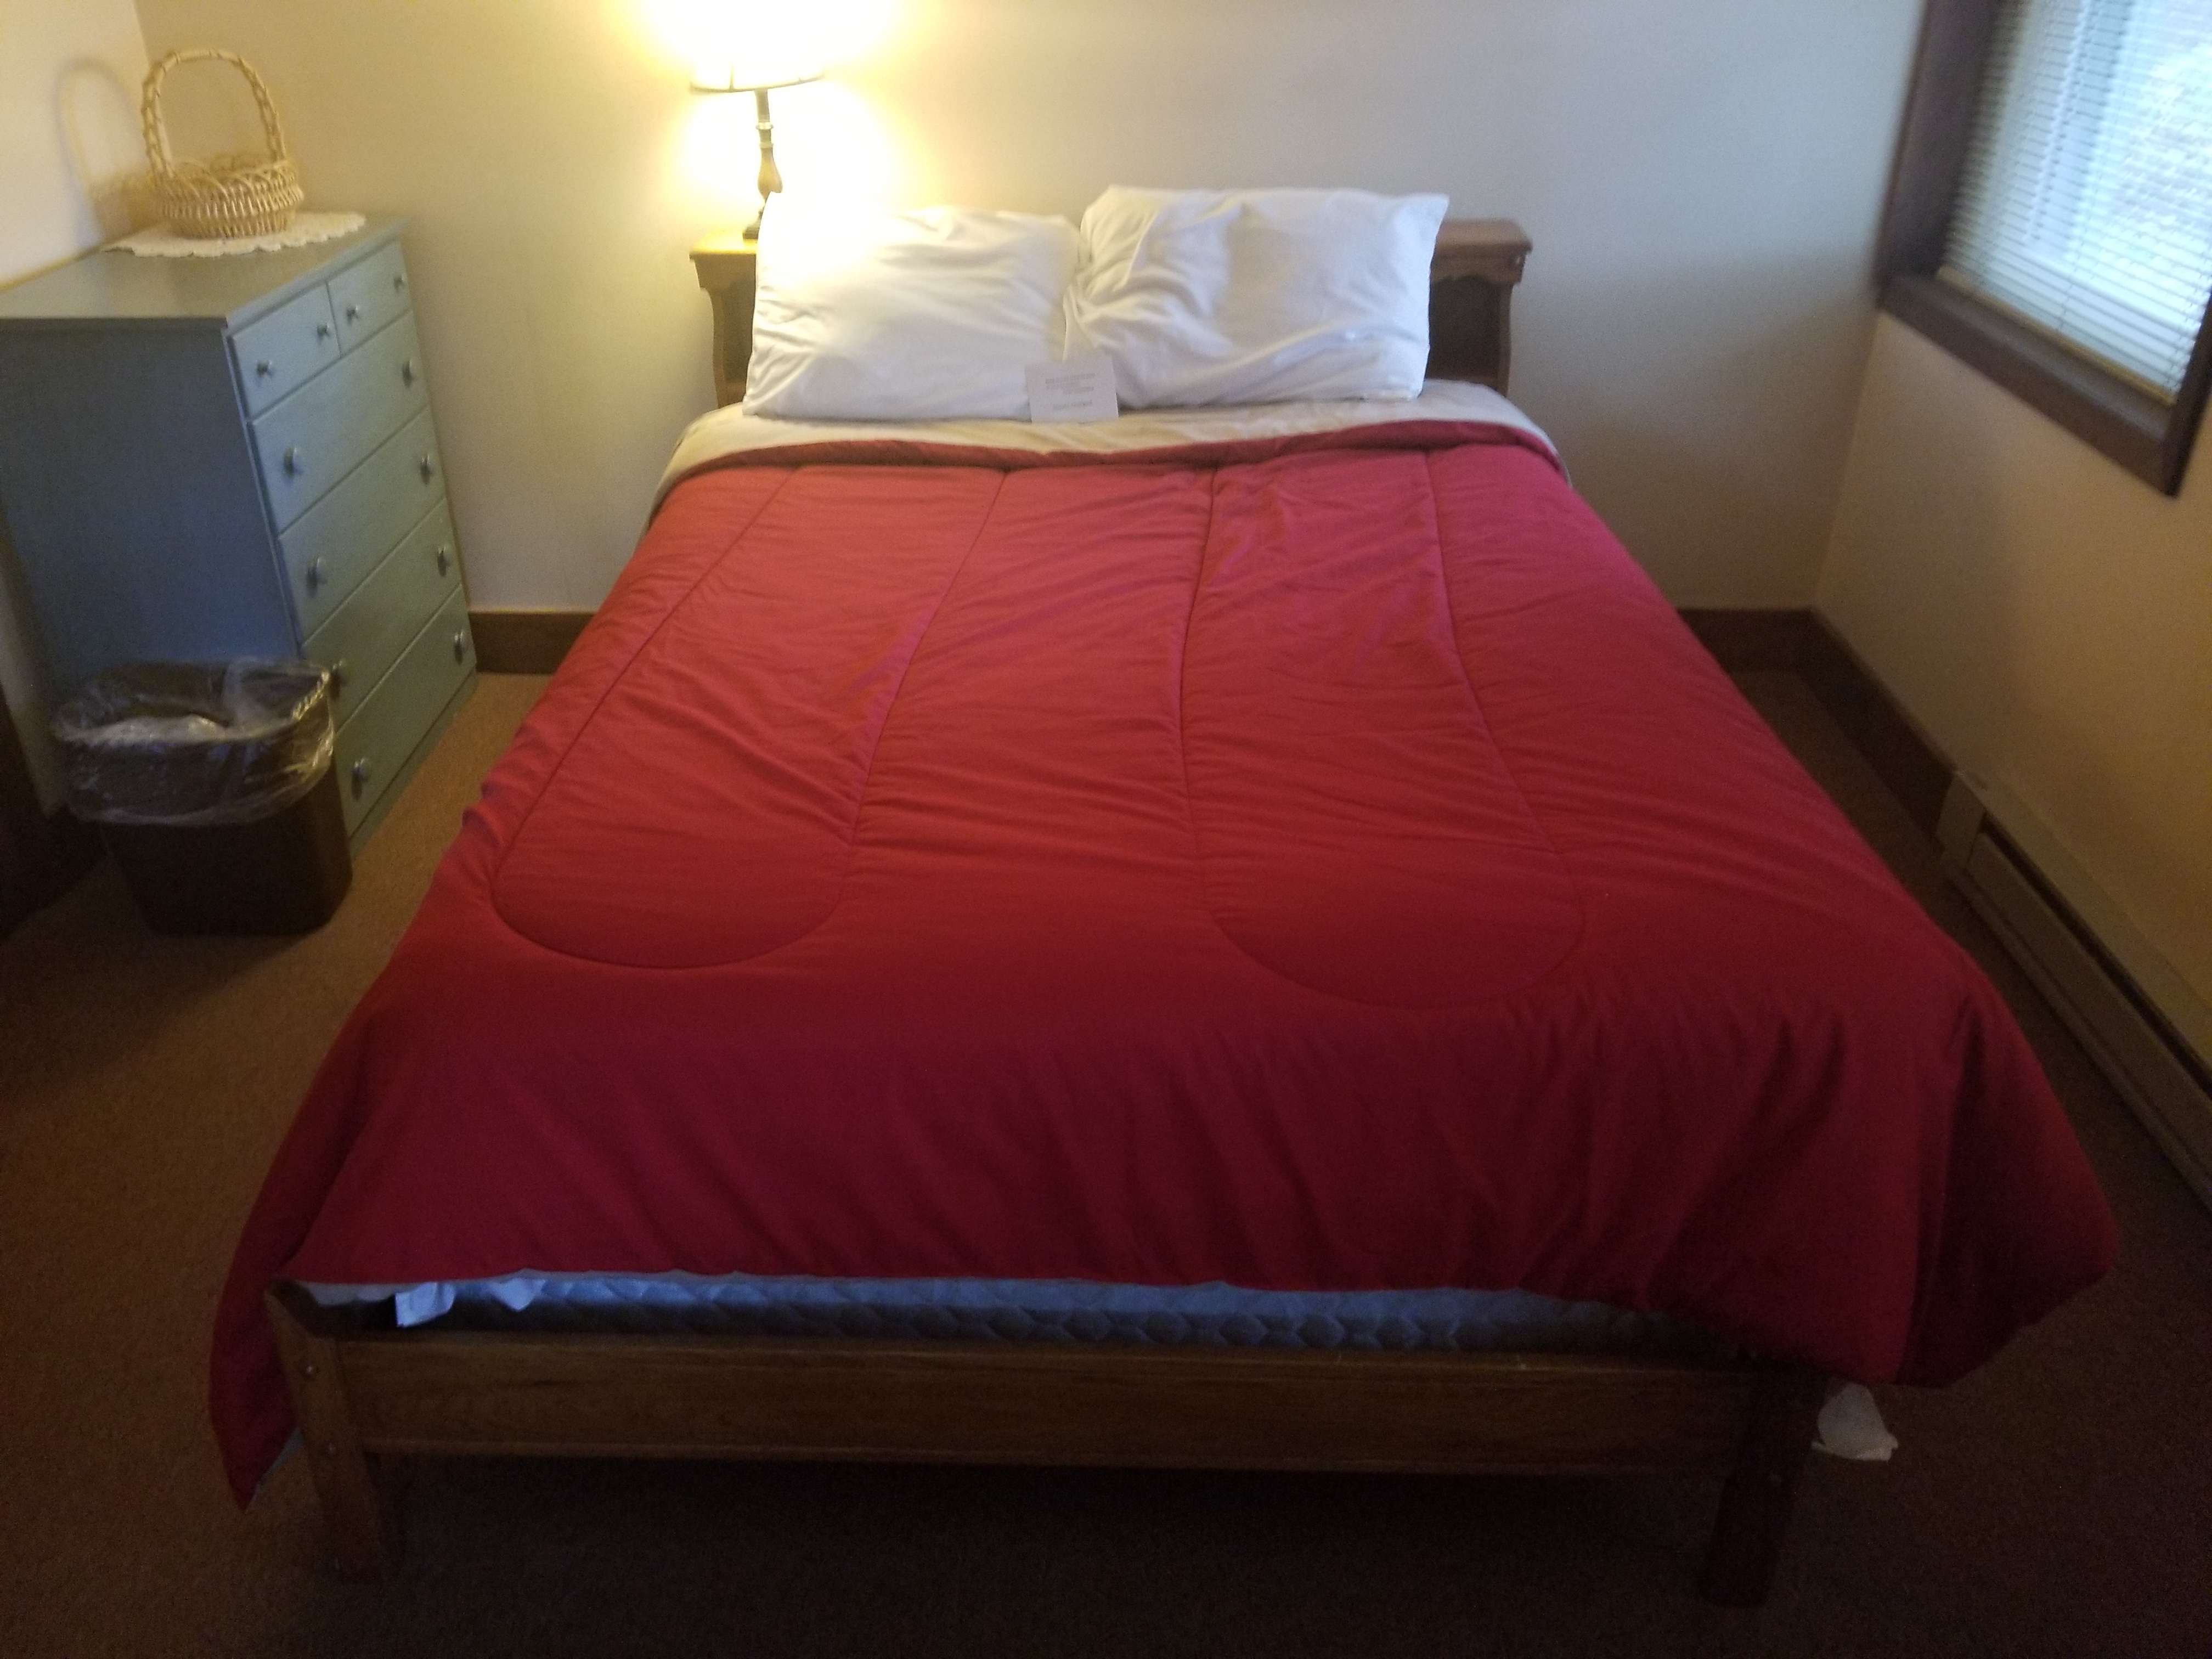 Room 1 - Double Bed